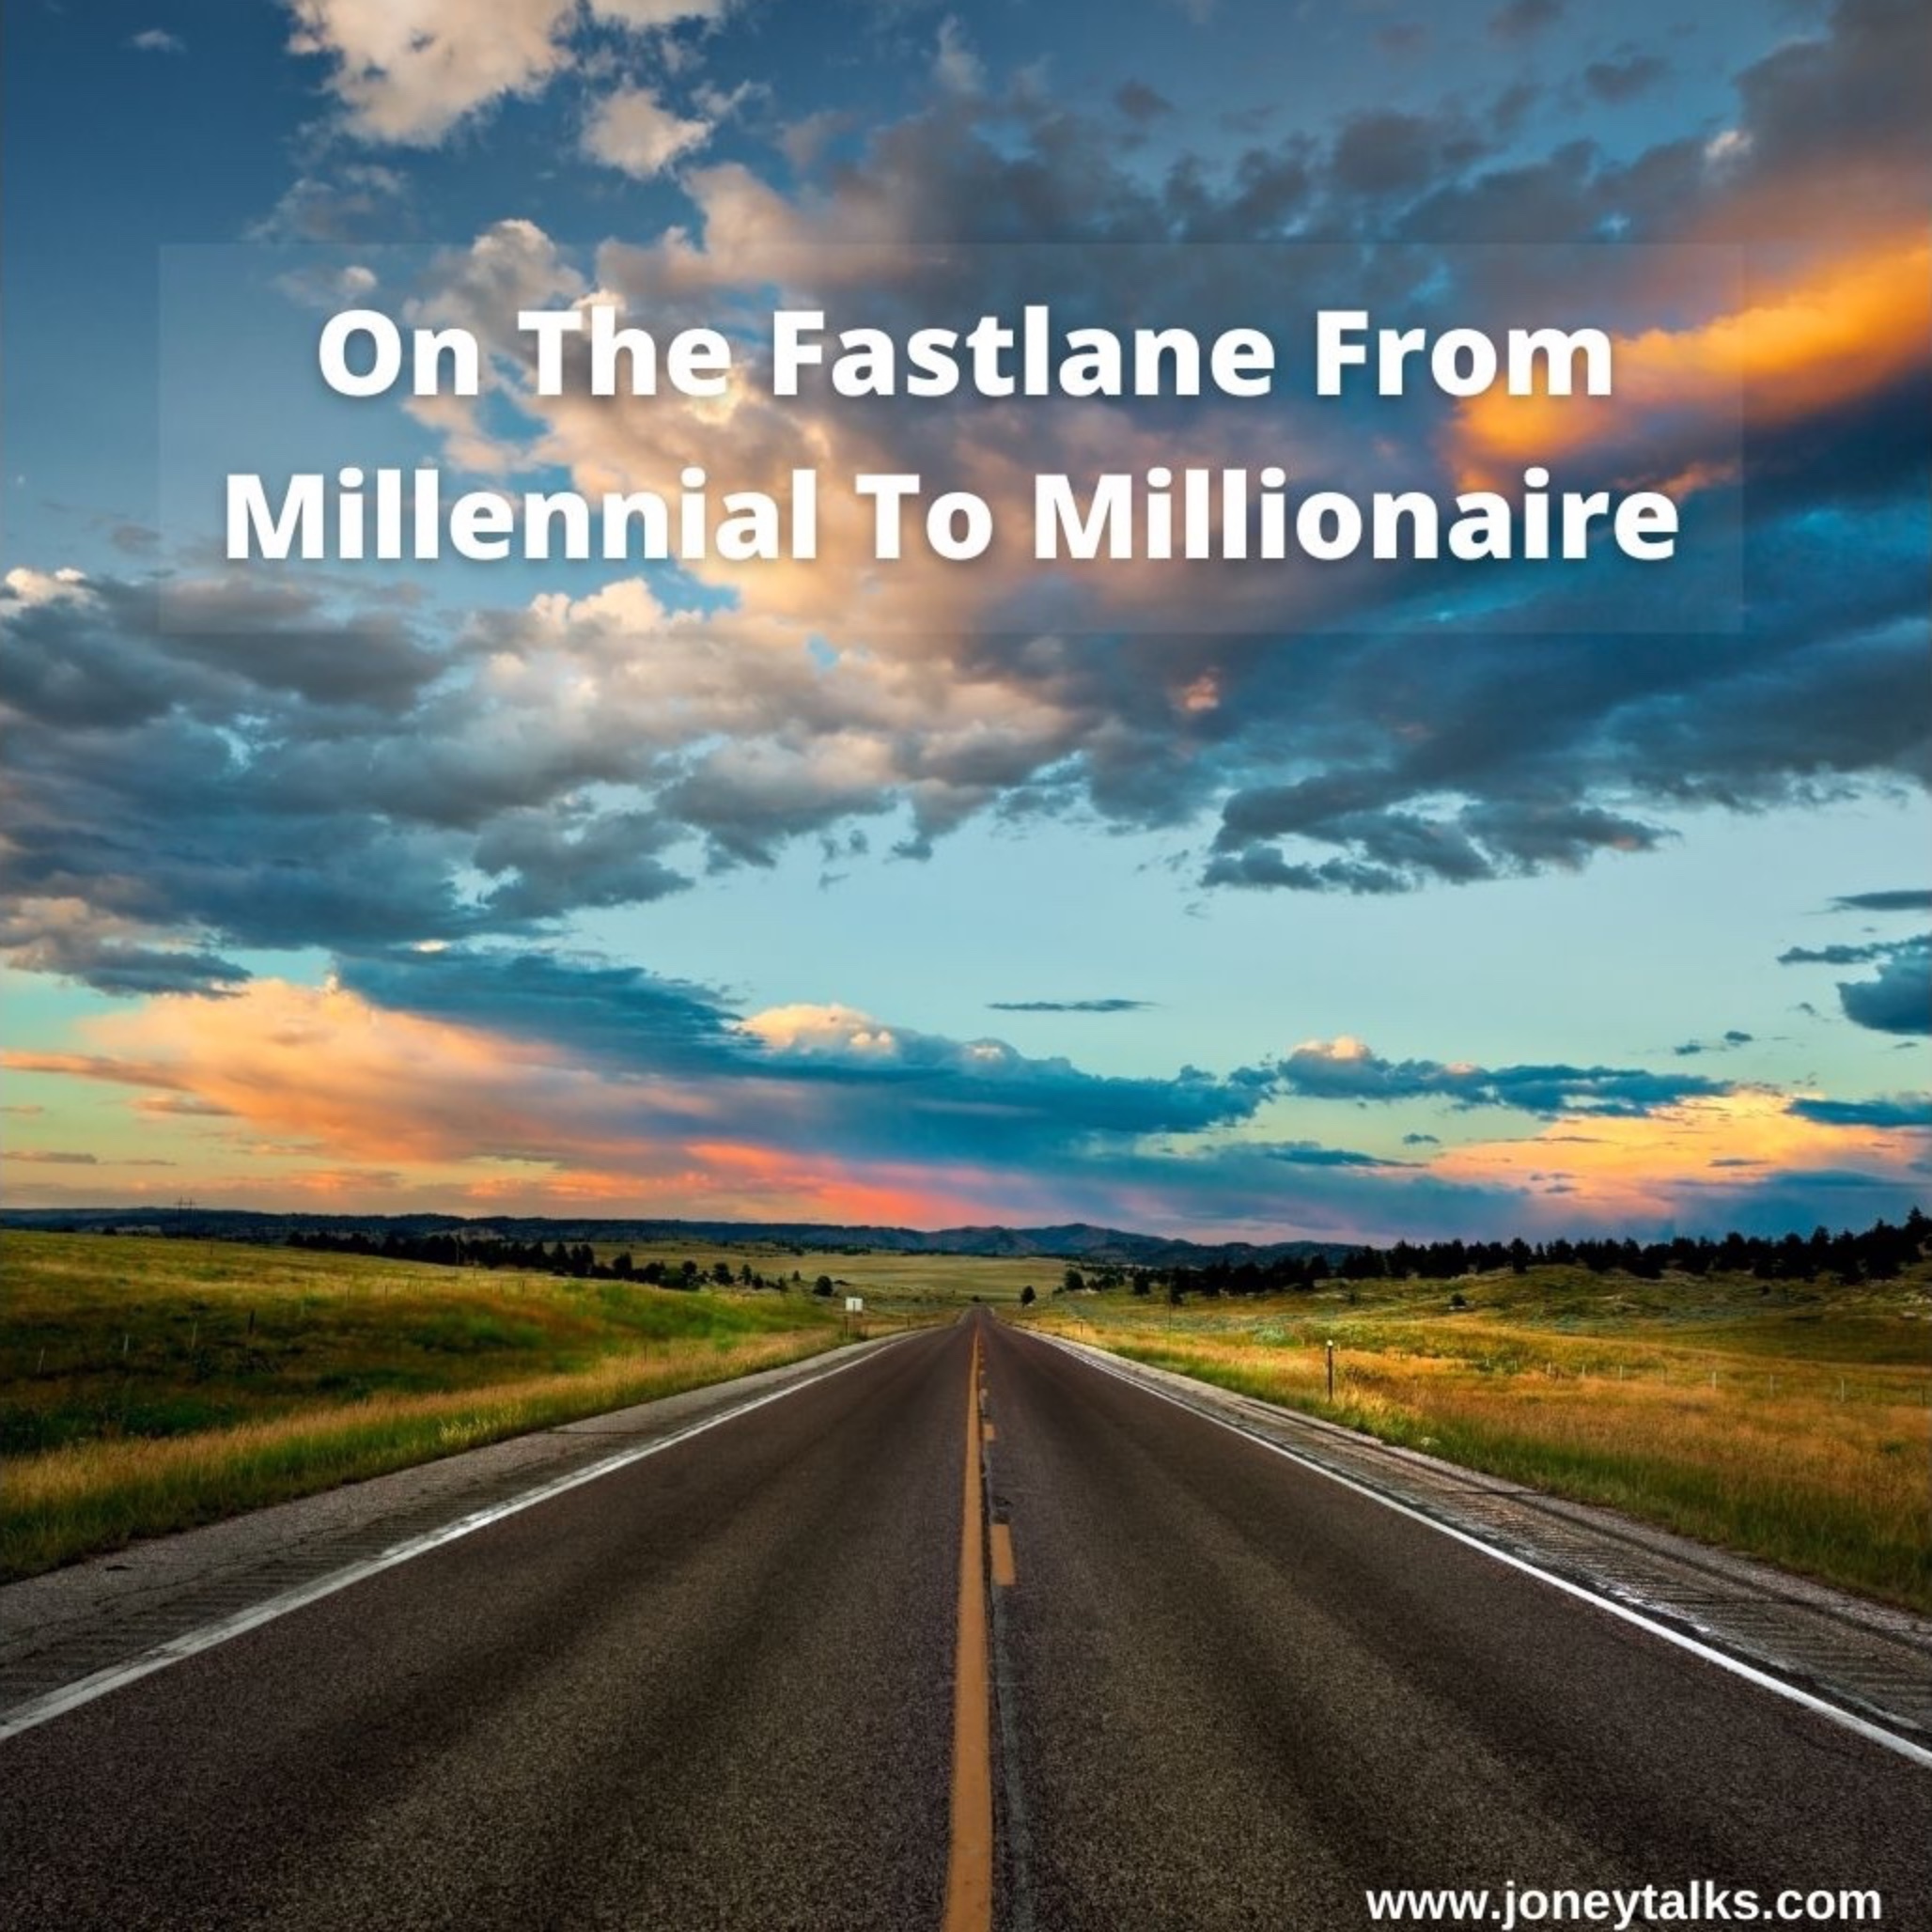 On The Fastlane From Millennial To Millionaire with Paris